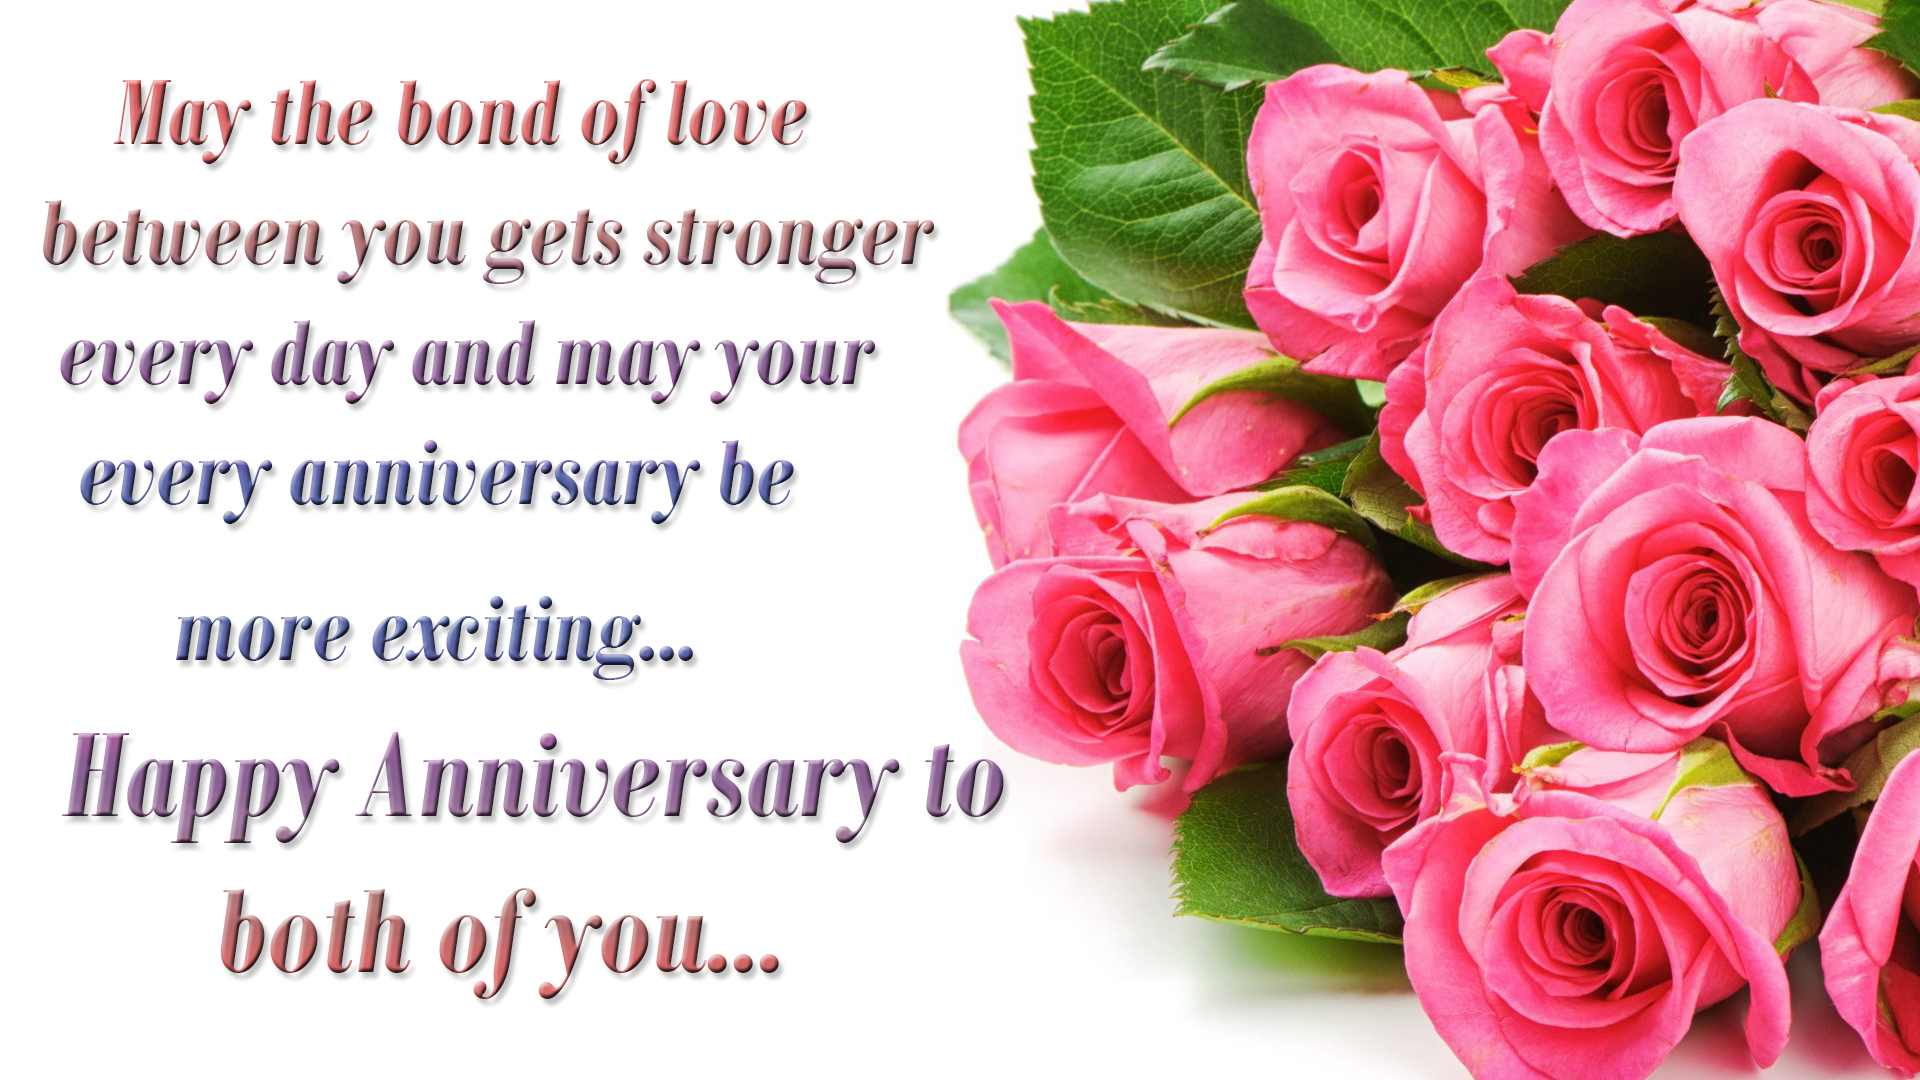 Anniversary Greetings Images | Happy Anniversary Wishes